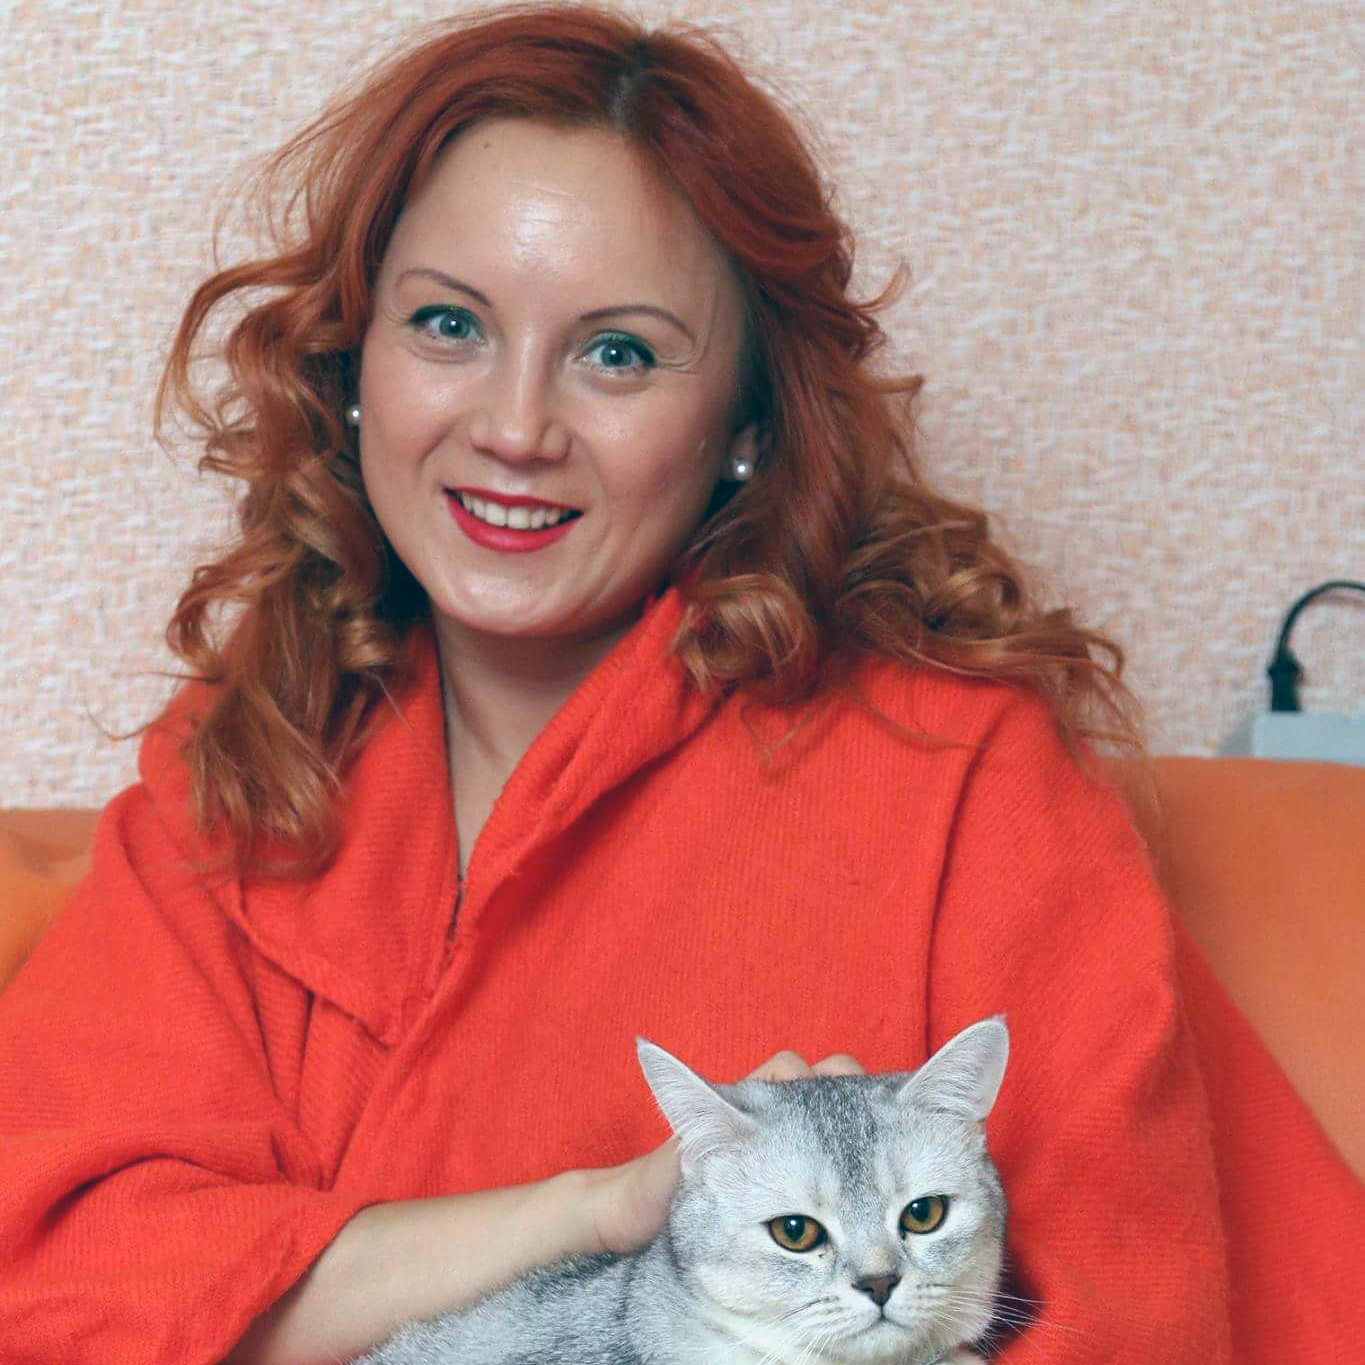 Svetlana Izambayeva, 36, won a beauty pageant in 2005 for HIV-positive women, becoming one of the first Russians to bring the country's HIV/Aids epidemic to the public eye [Image courtesy Svetlana Izambayeva ]